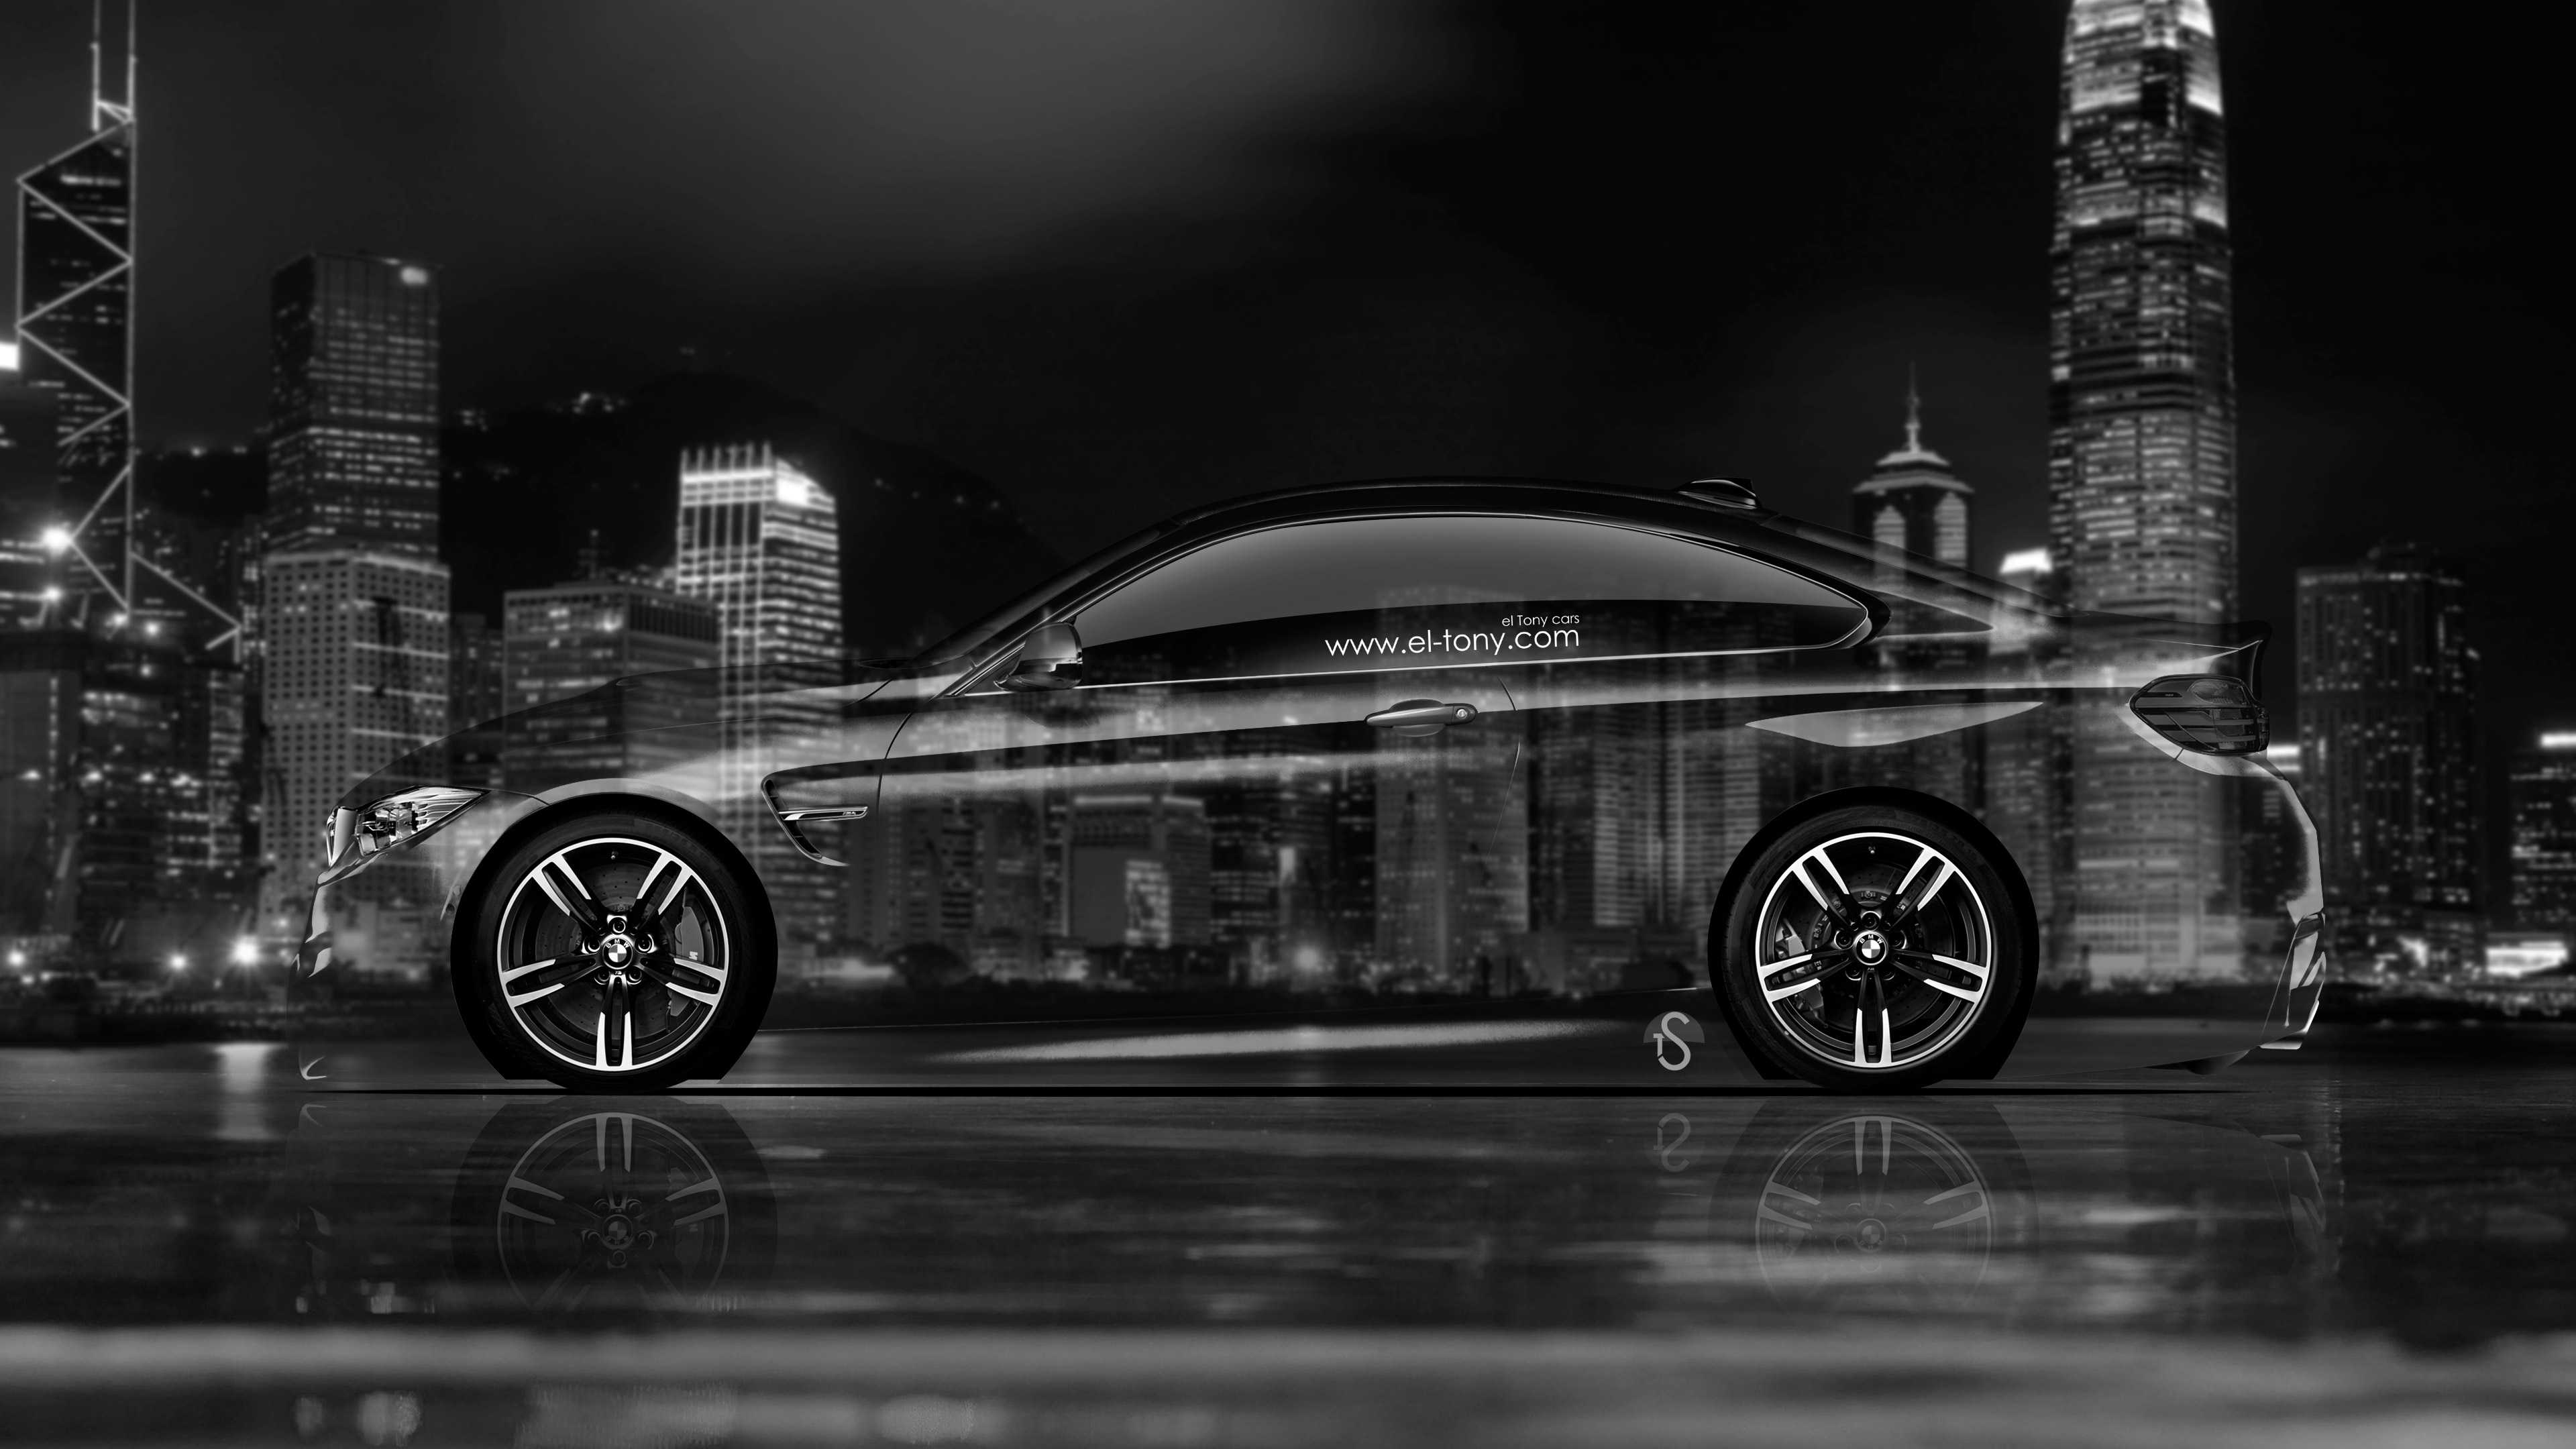 BMW-M4-Coupe-Side-Crystal-City-Car-2014-Black-White-4K-Wallpapers-design-by-Tony-Kokhan-www.el-tony.com_